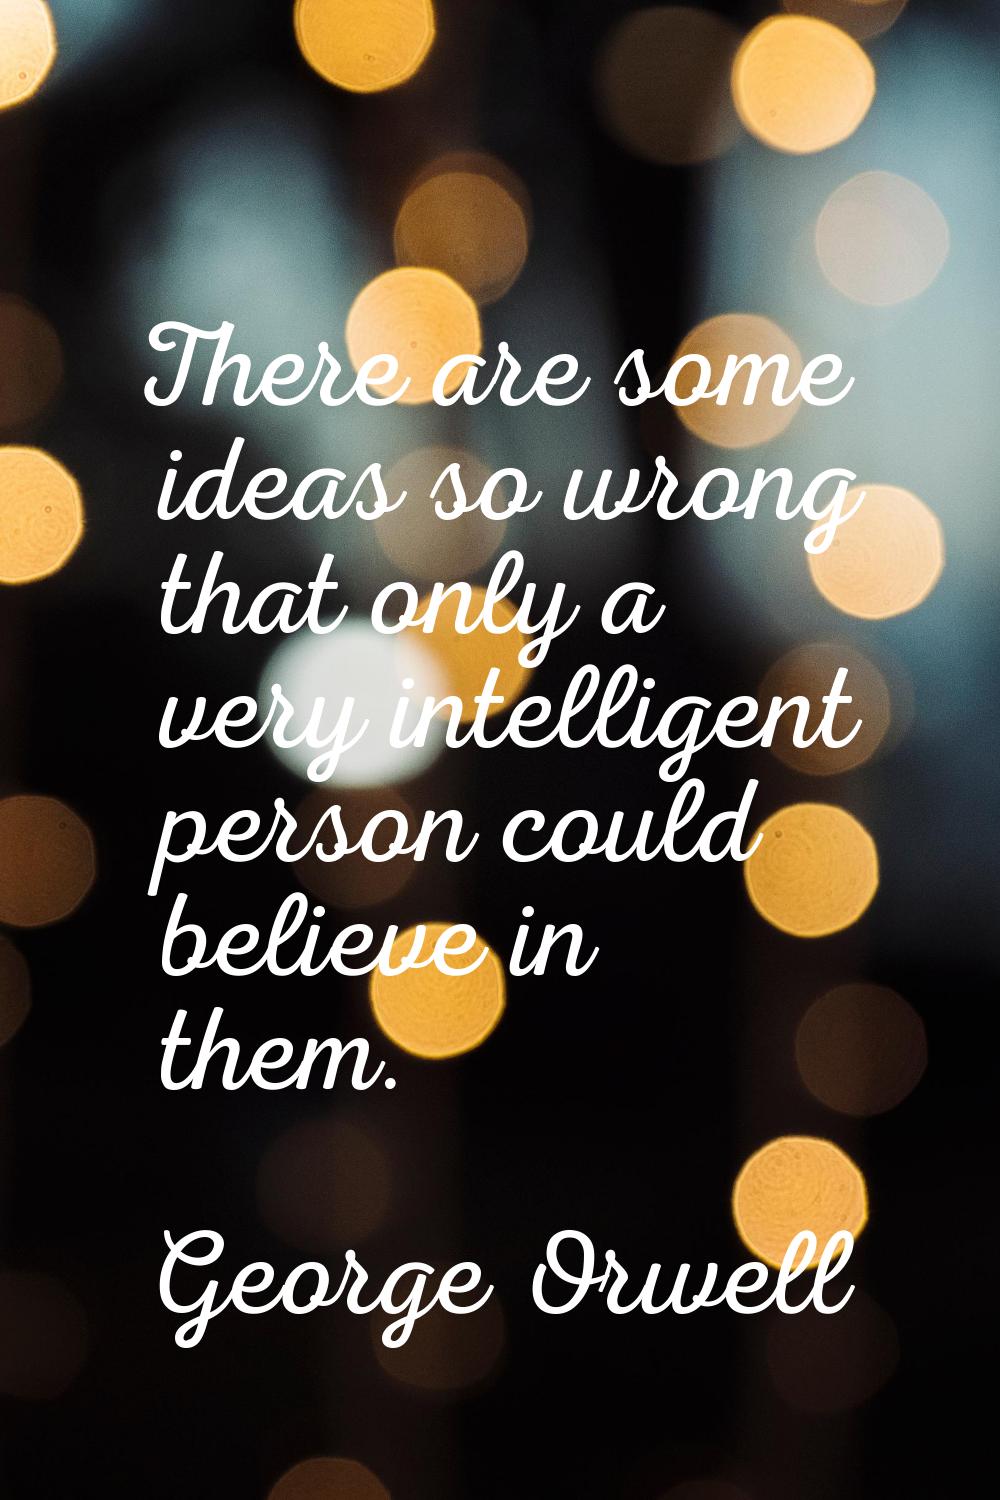 There are some ideas so wrong that only a very intelligent person could believe in them.